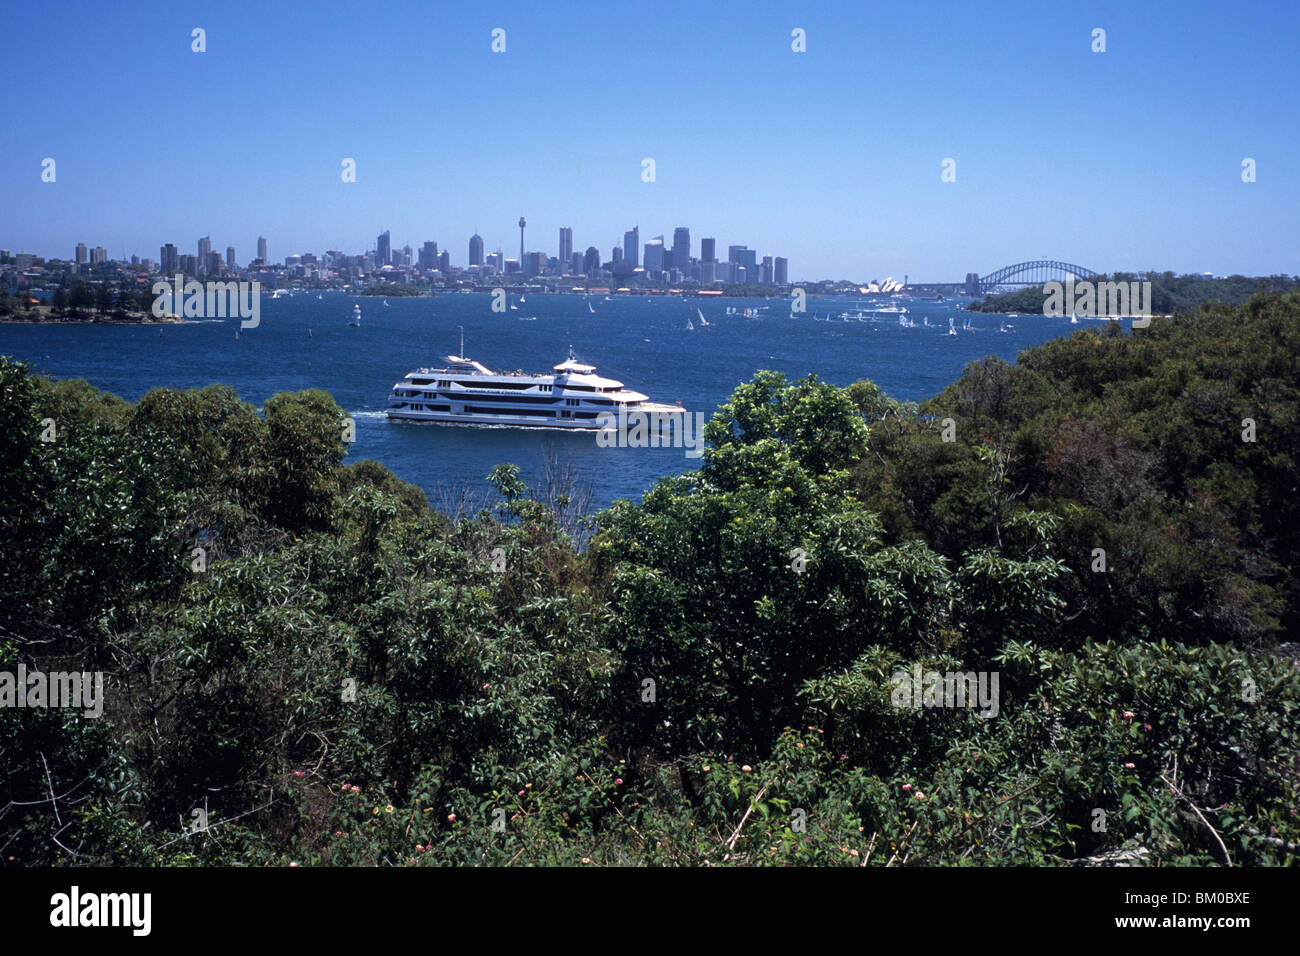 Captain Cook Cruise Boat & Sydney Skyline, View from Nielsen Park, Sydney, New South Wales, Australia Stock Photo